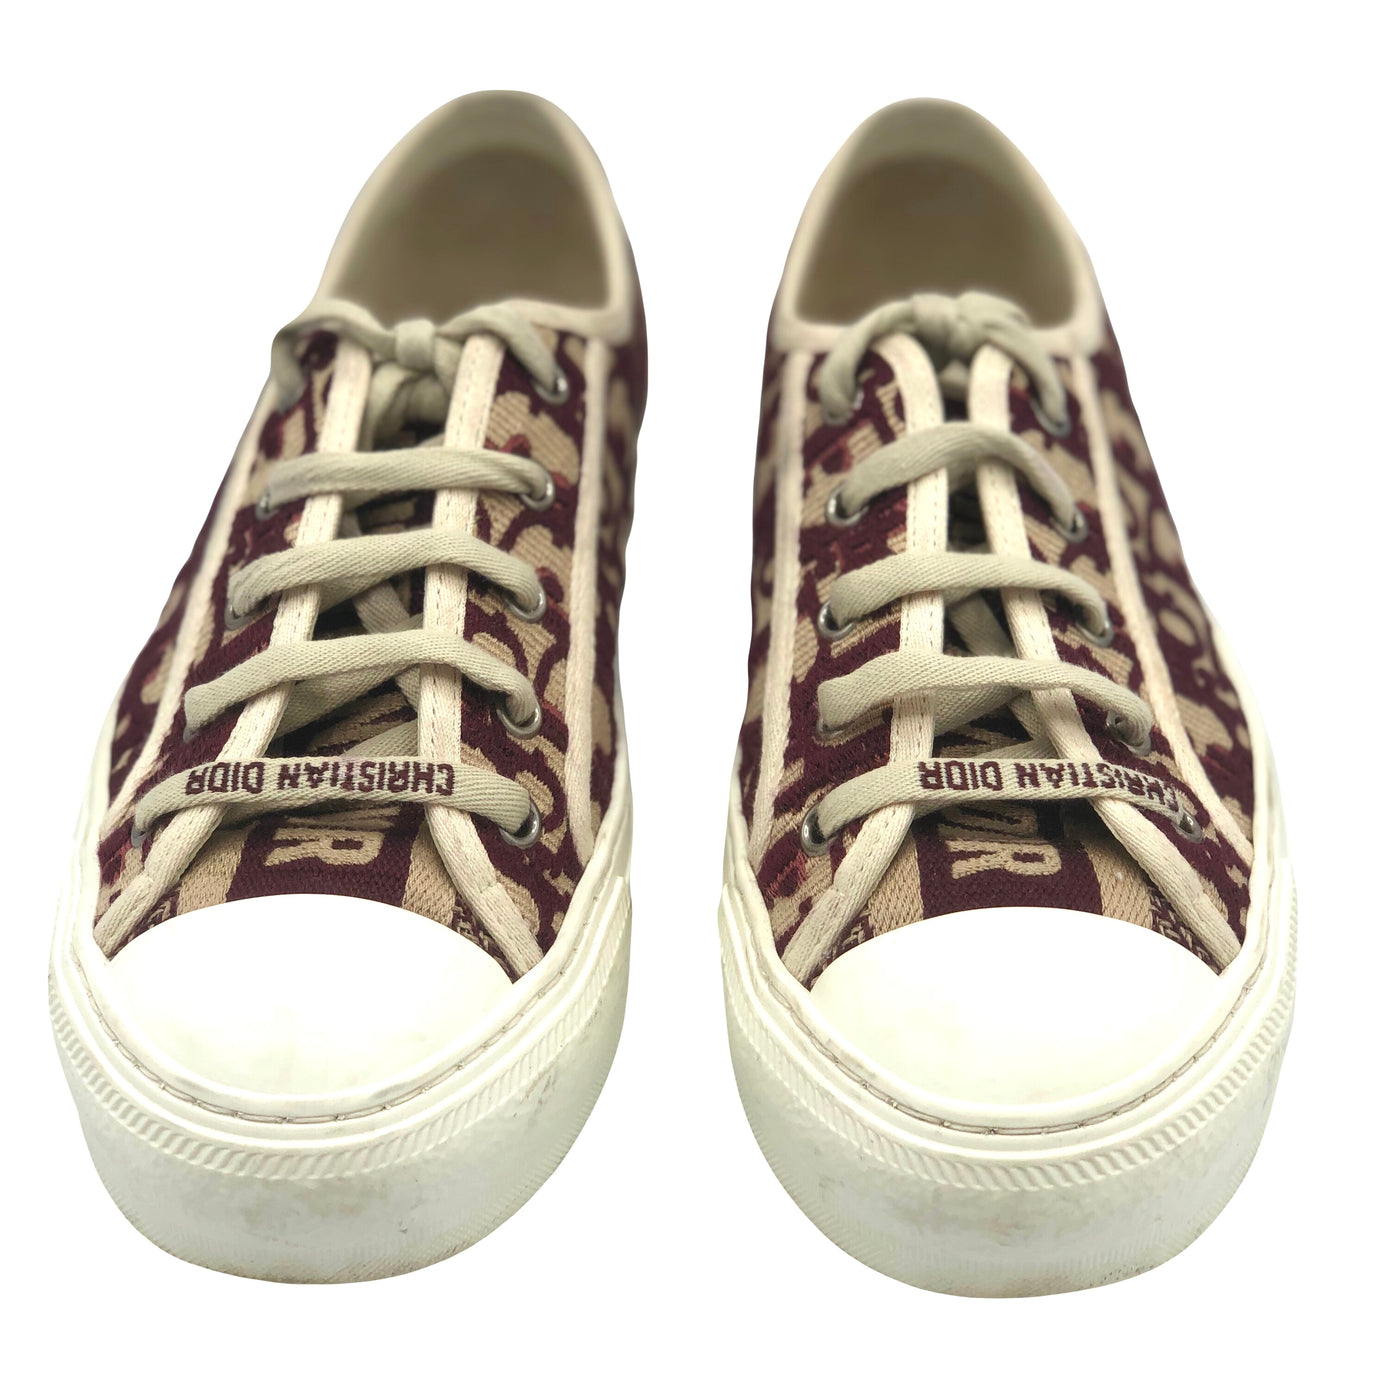 Christian DIOR Walk n’ Dior low trainers size 36 RRP: £780